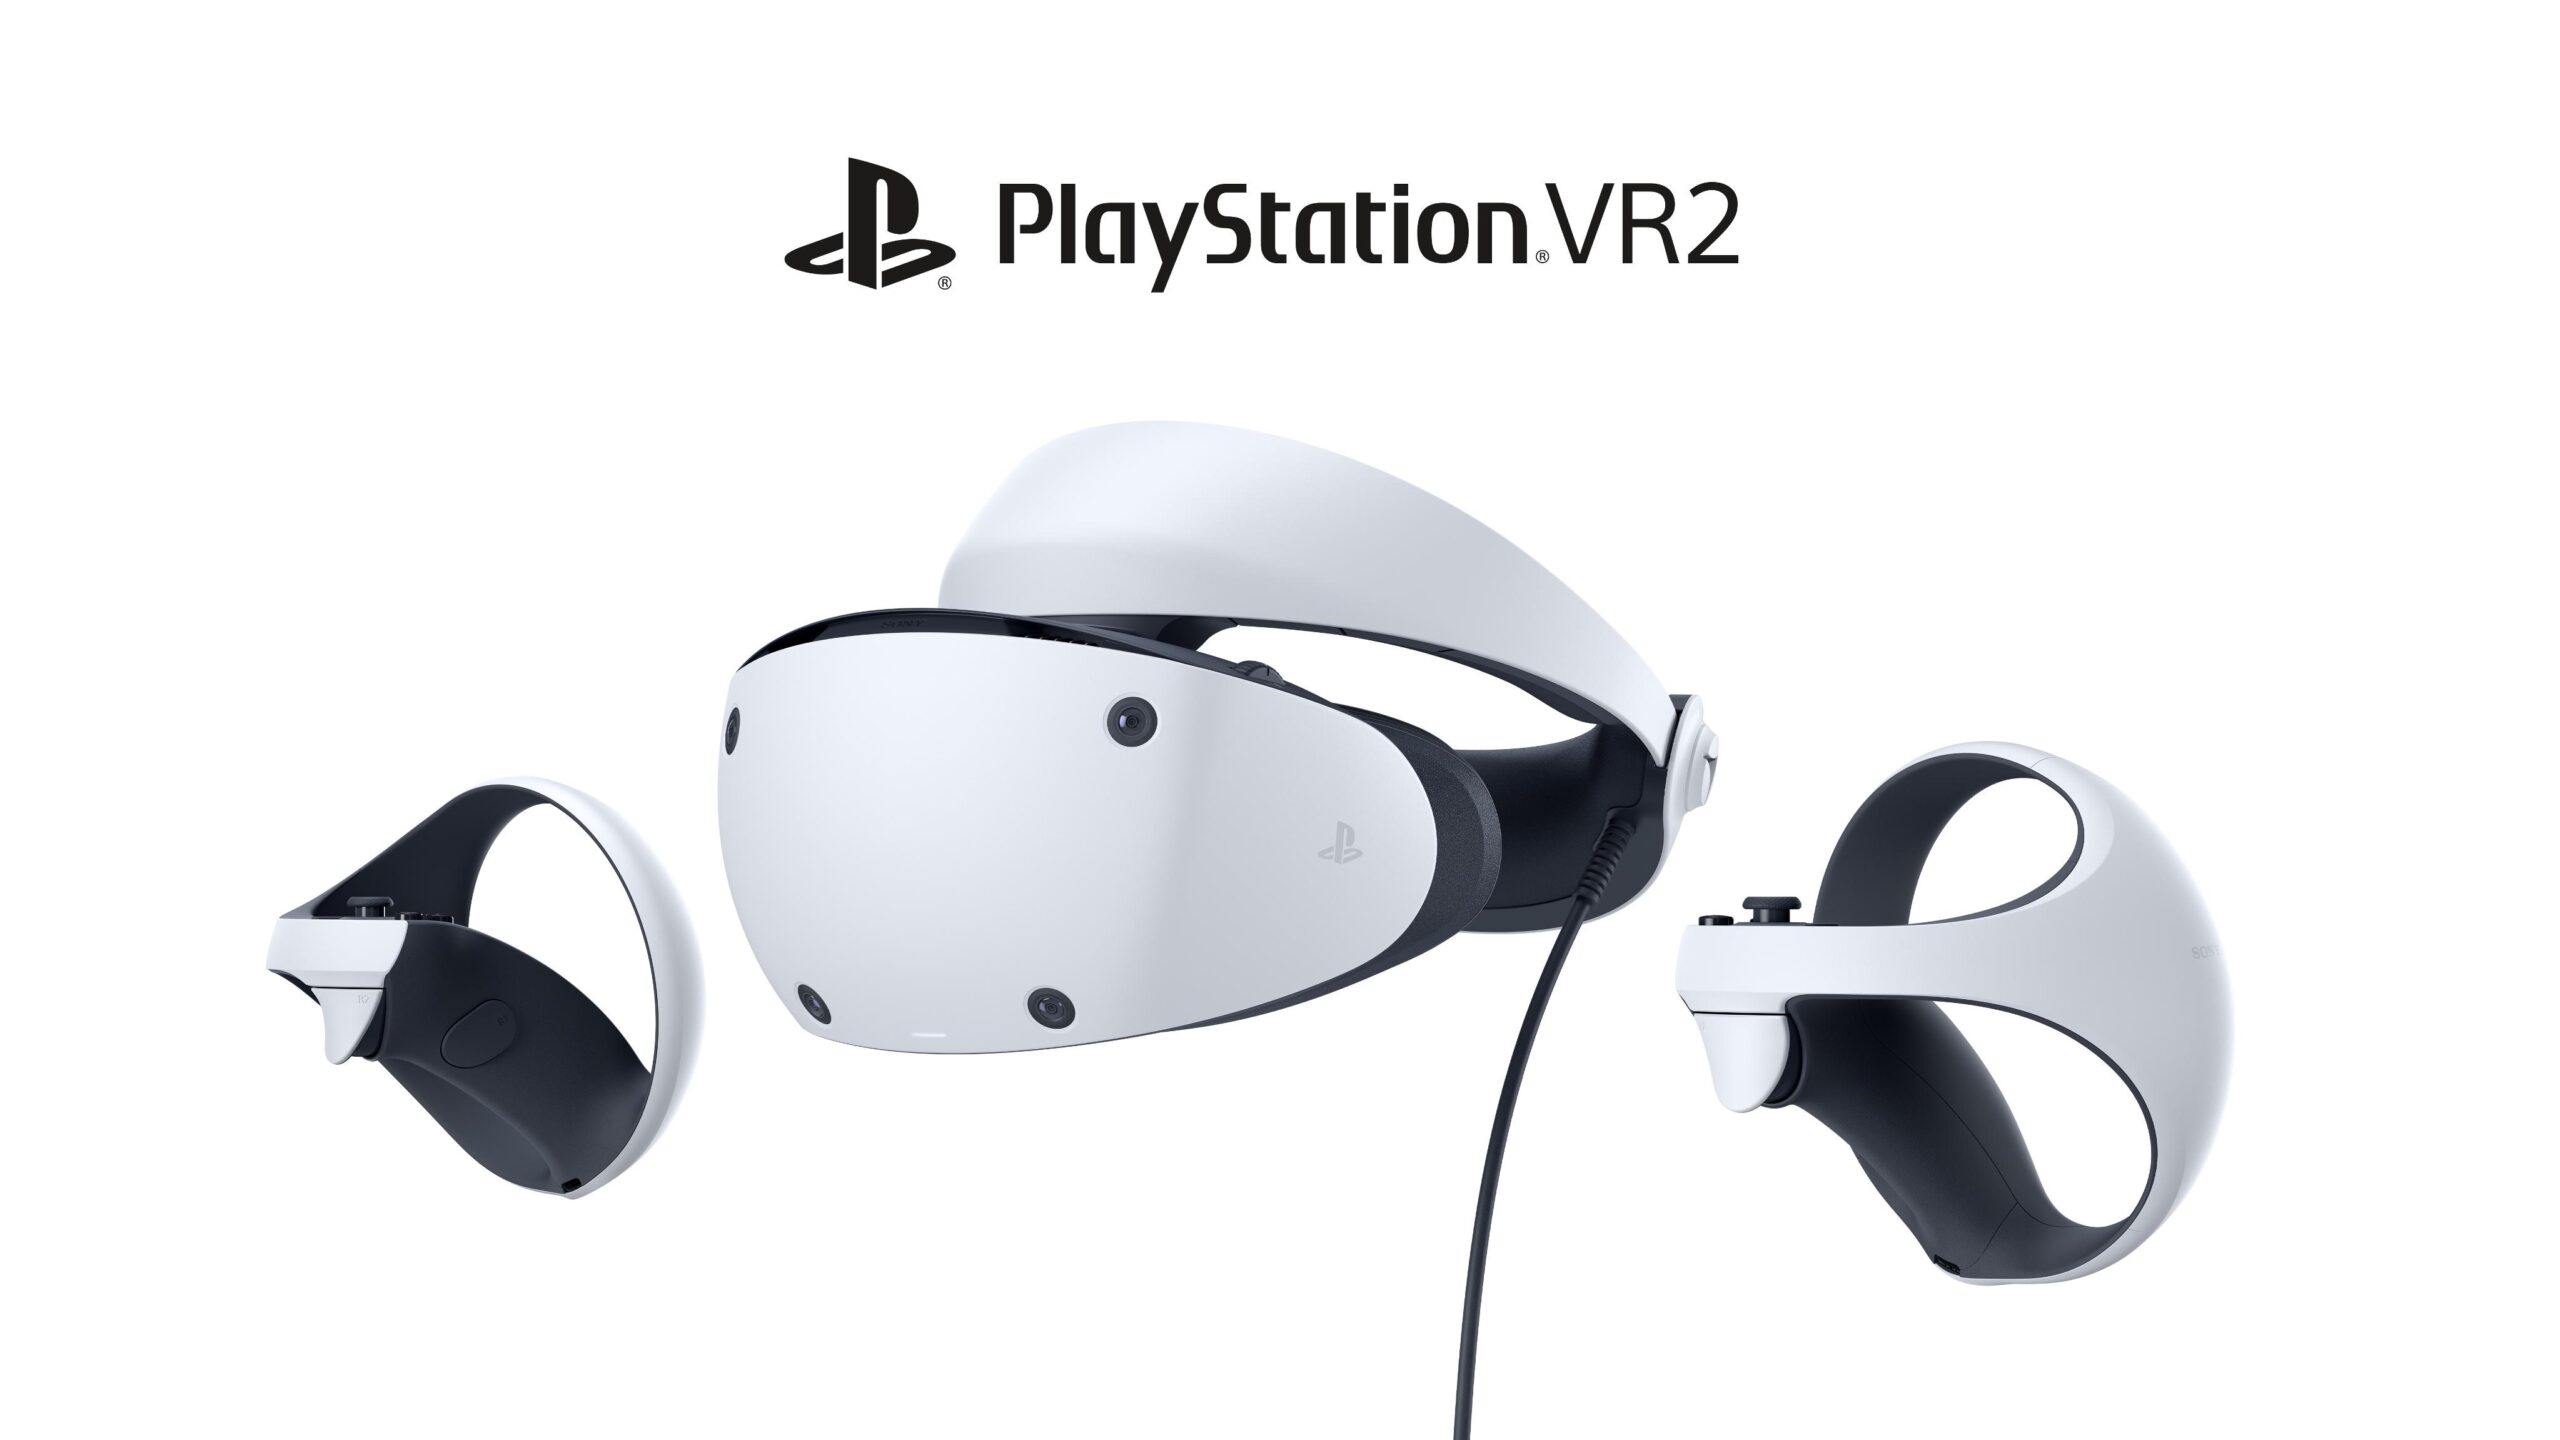 Will the PSVR 2 Work on PC, or only PS5? : r/PSVR